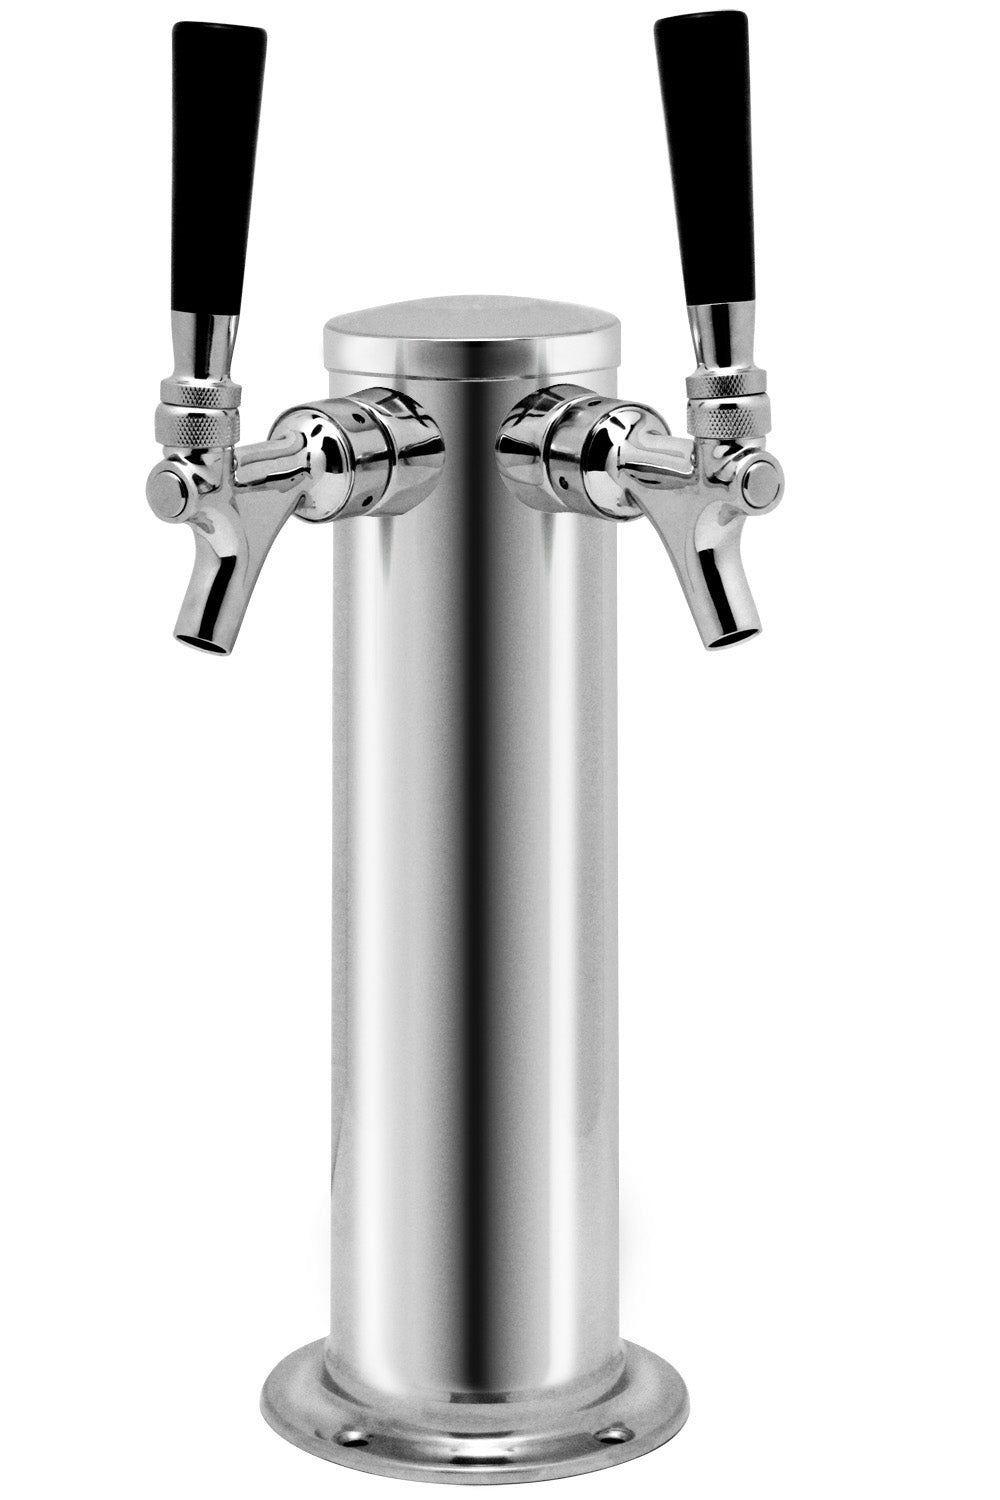 Polished Stainless Steel Dual Faucet Draft Beer Tower - 3-Inch Diameter Column